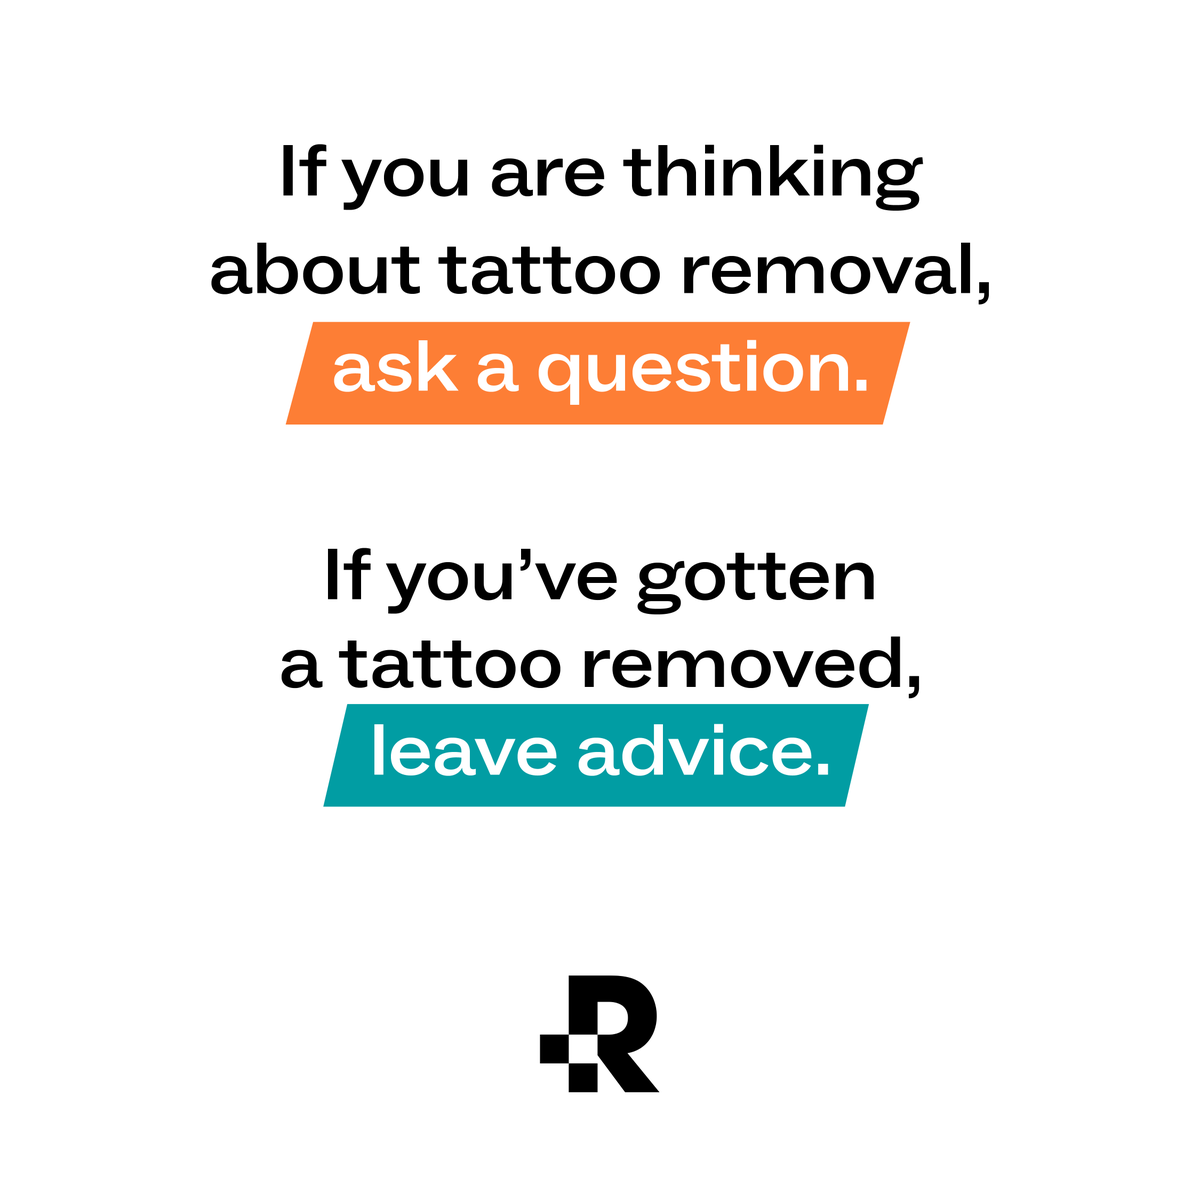 The floor is yours! Let’s create a Q+A session in the comment sections.
#removery #tattooremoval #lasertattooremoval